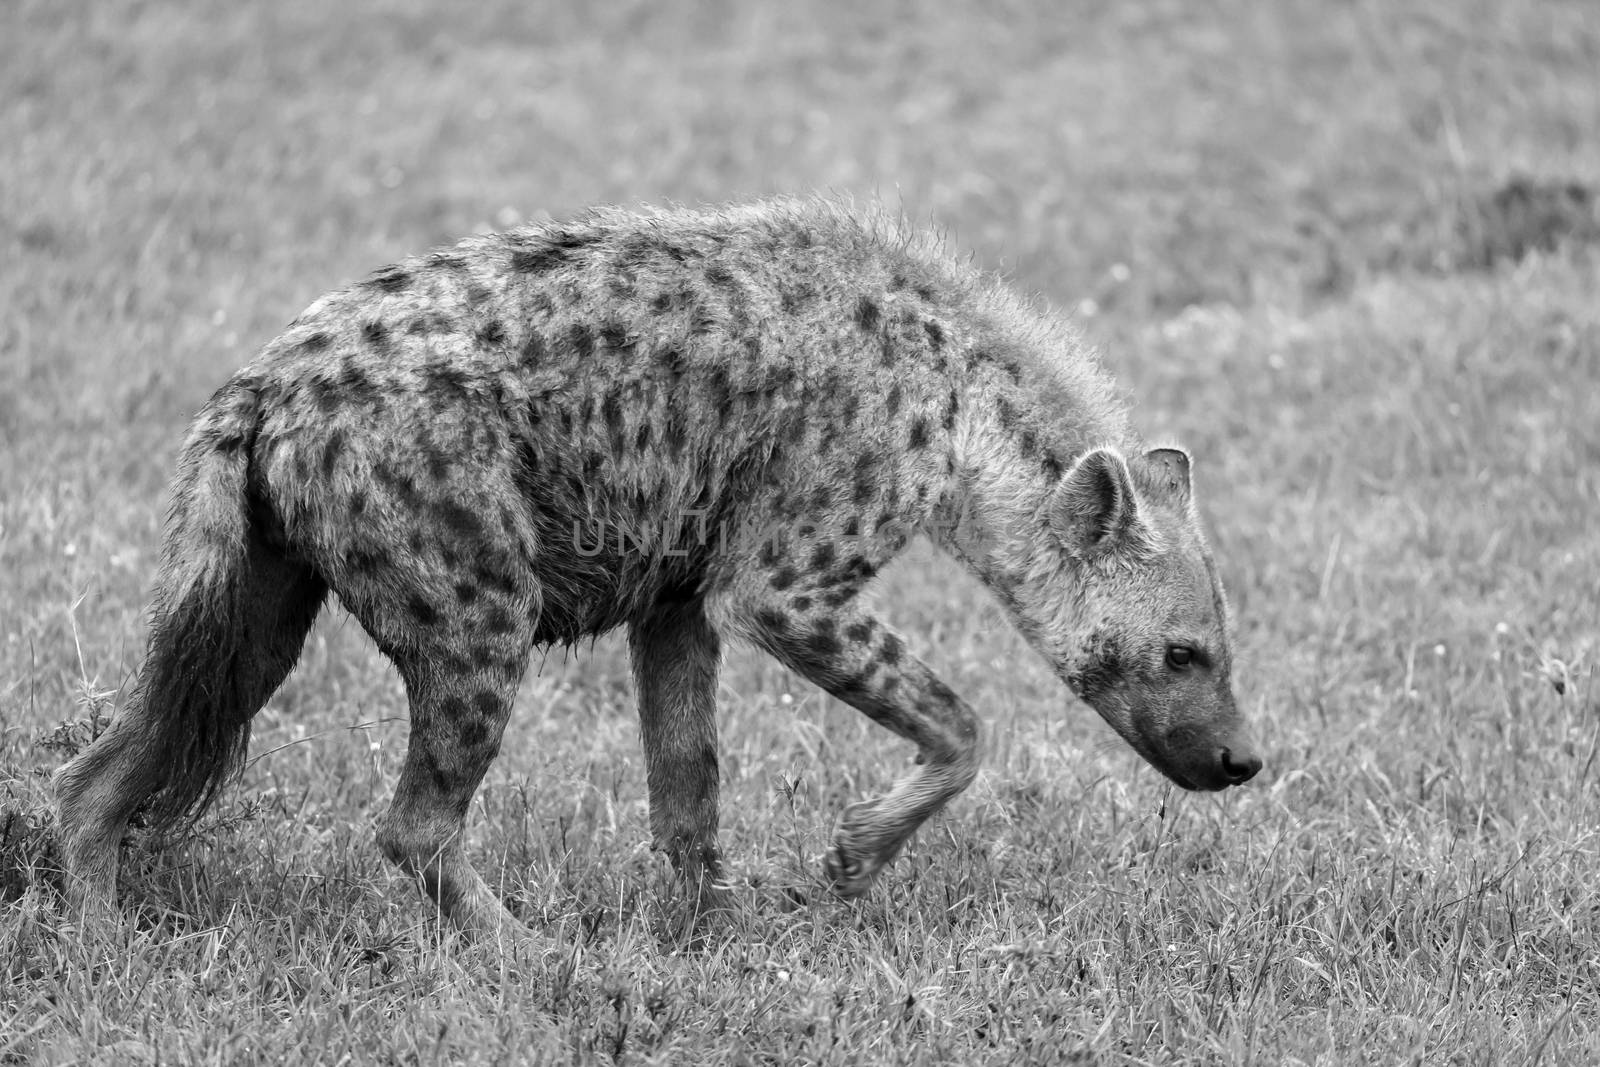 One hyena walks in the savanna in search of food